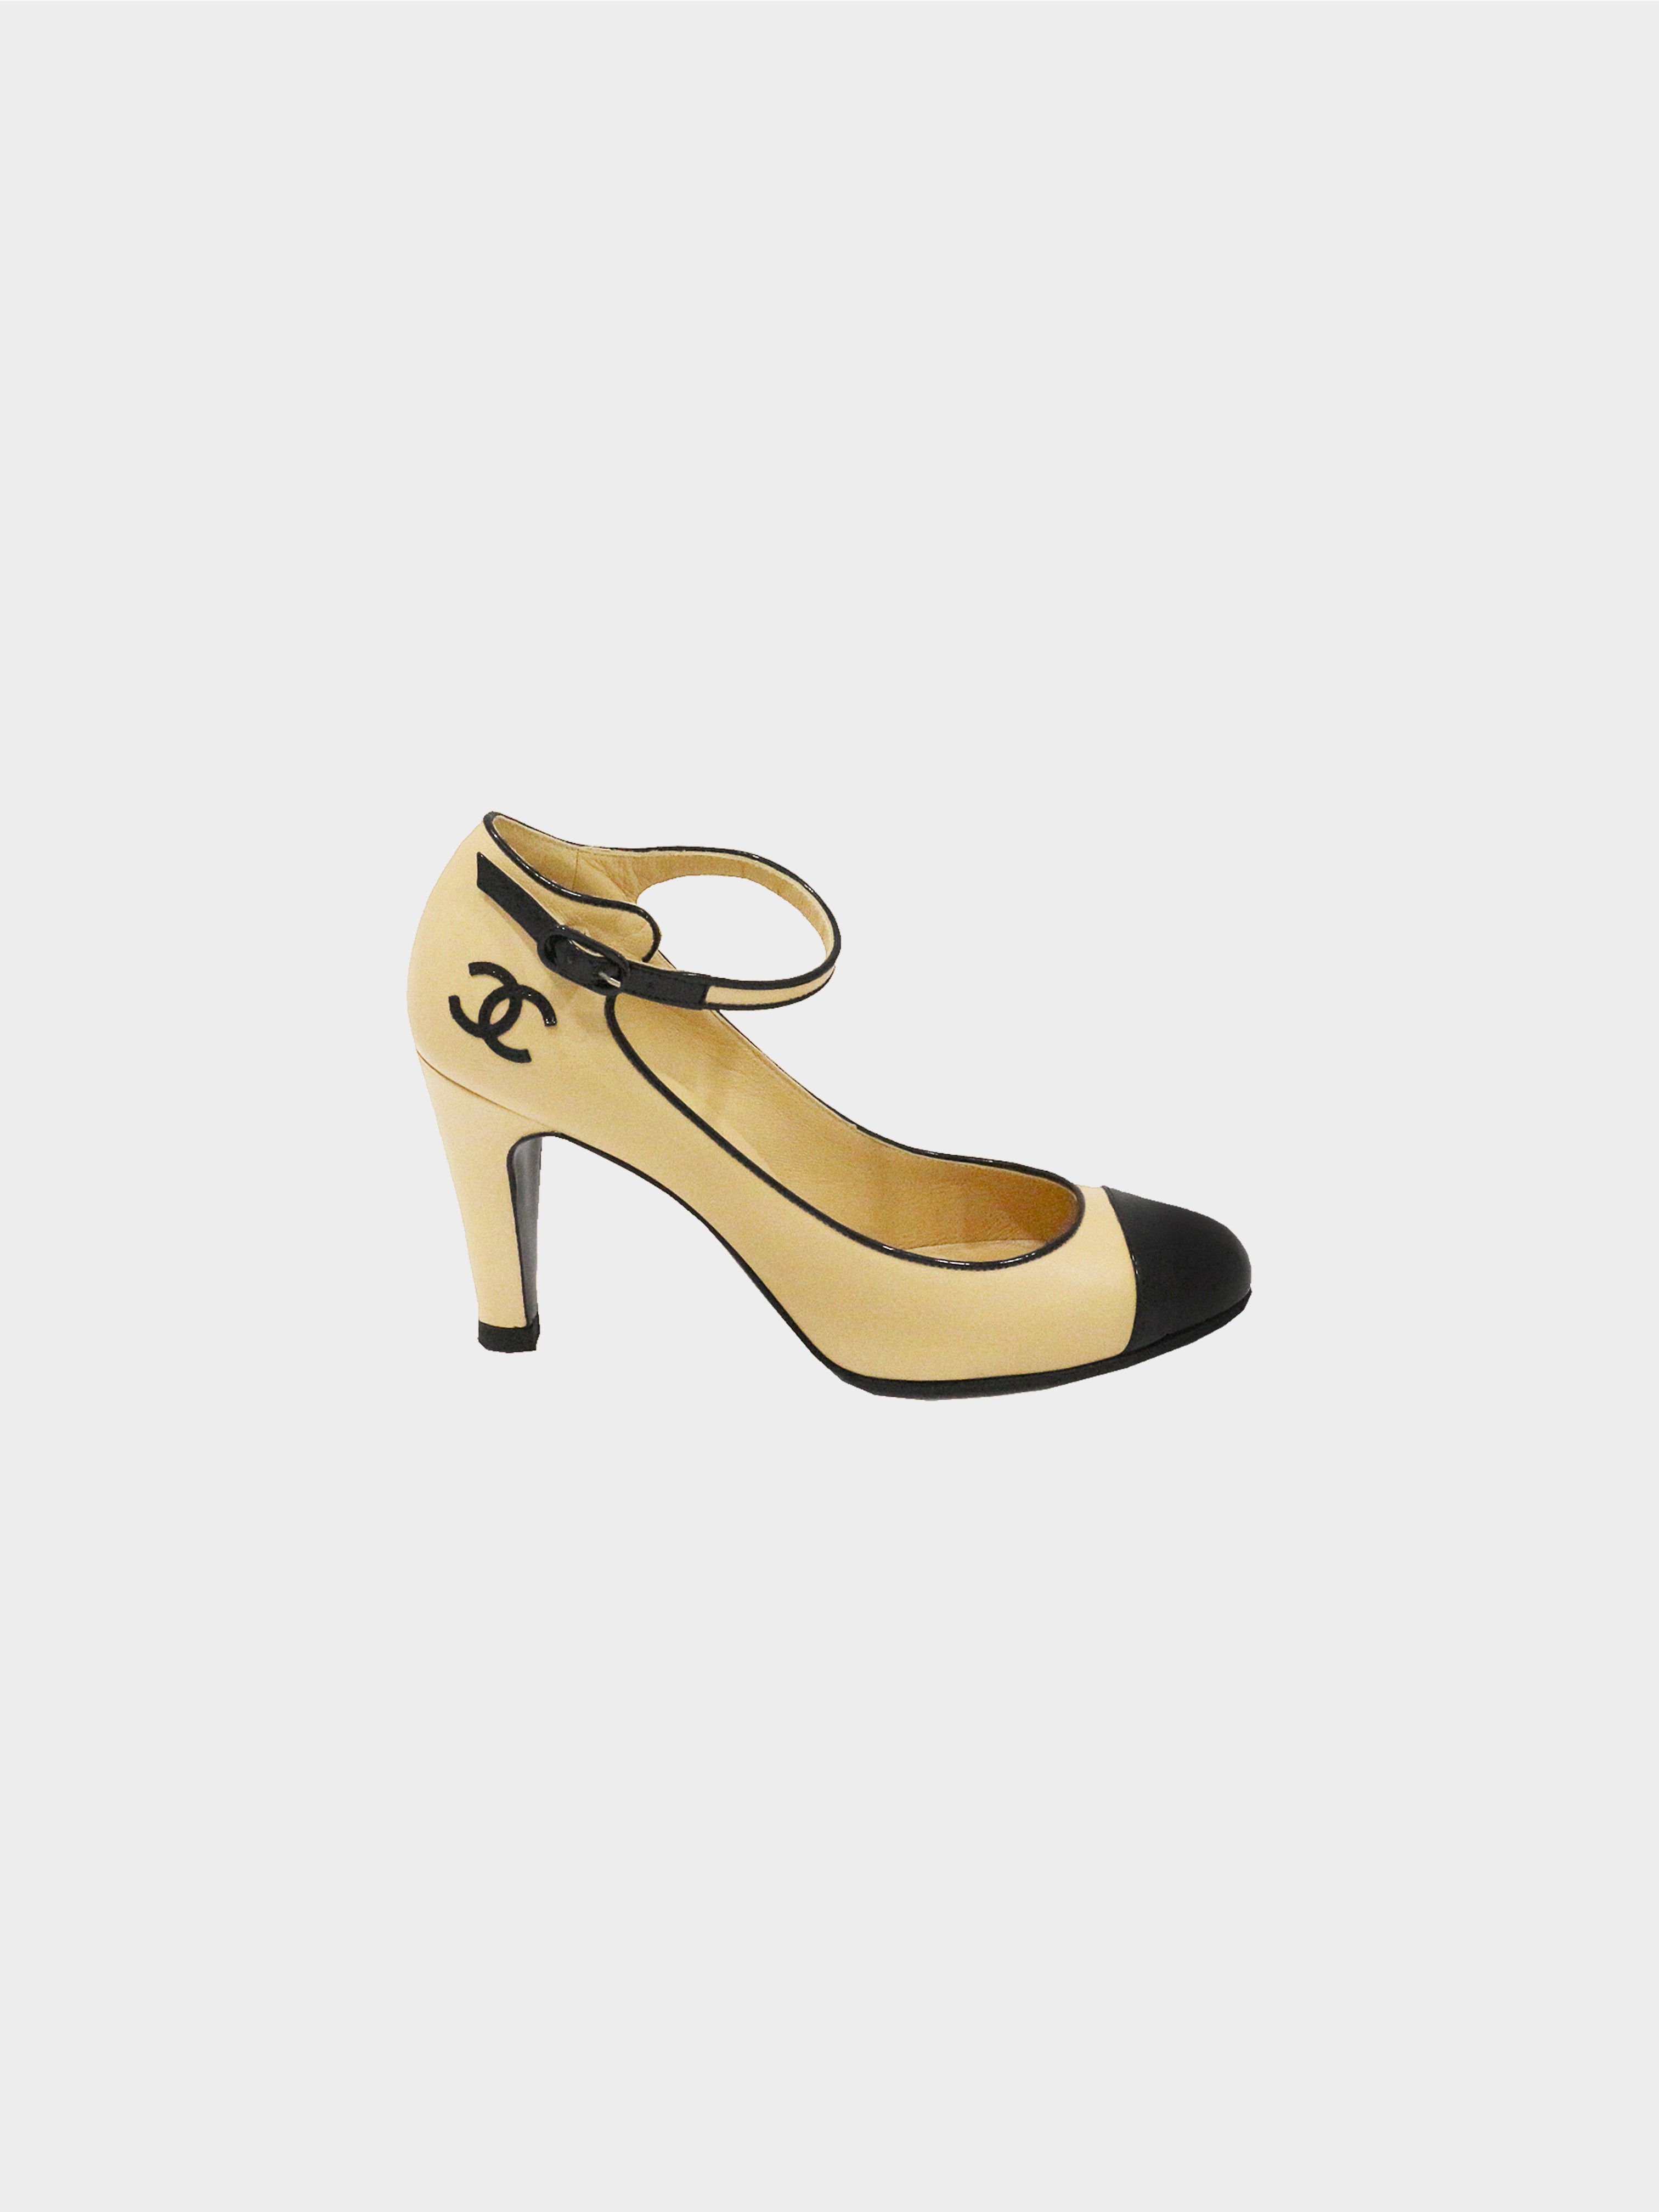 ON SALE* MICHAEL KORS #31196 Two Tone Heels (US 10 EU 40) – ALL YOUR BLISS